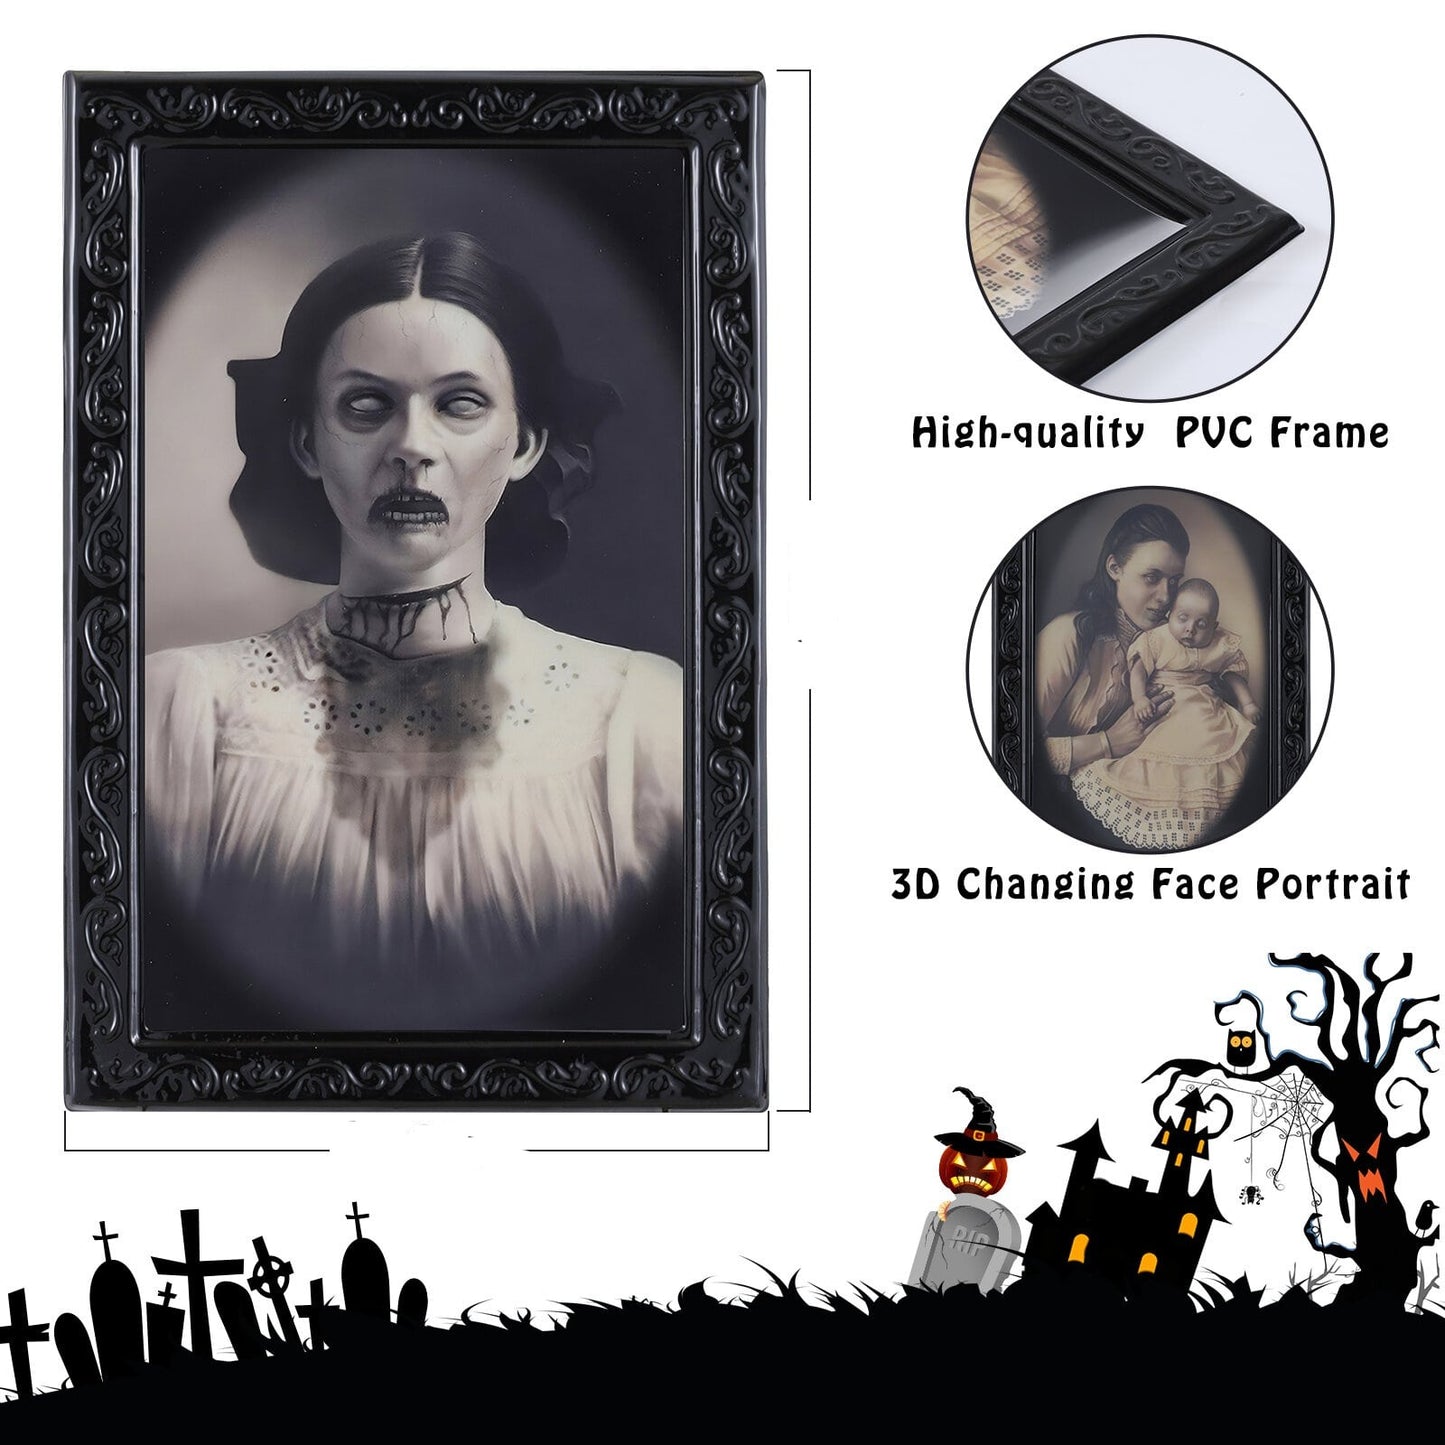 The Material of your 3D Changing Face Halloween Portrait